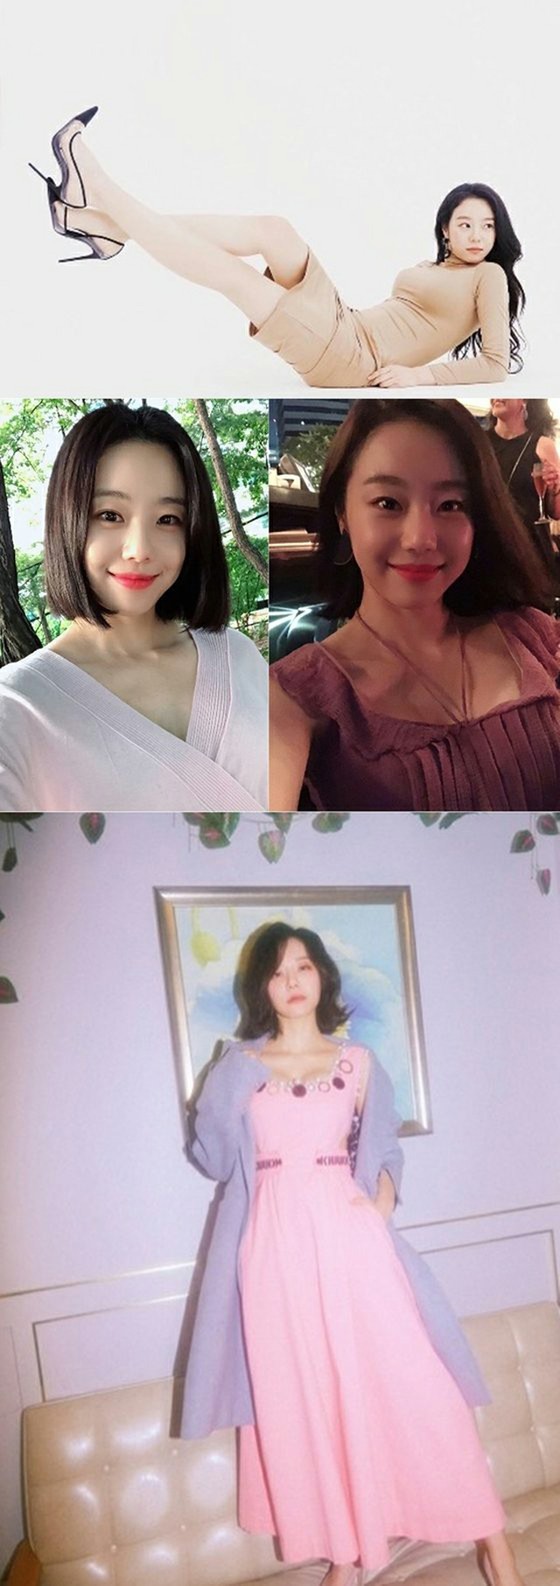 “Brainy Sexy Woman” actress Lee Shi Won appealed to the program with DNA “Father is former MENSA President, I am from Seoul University”